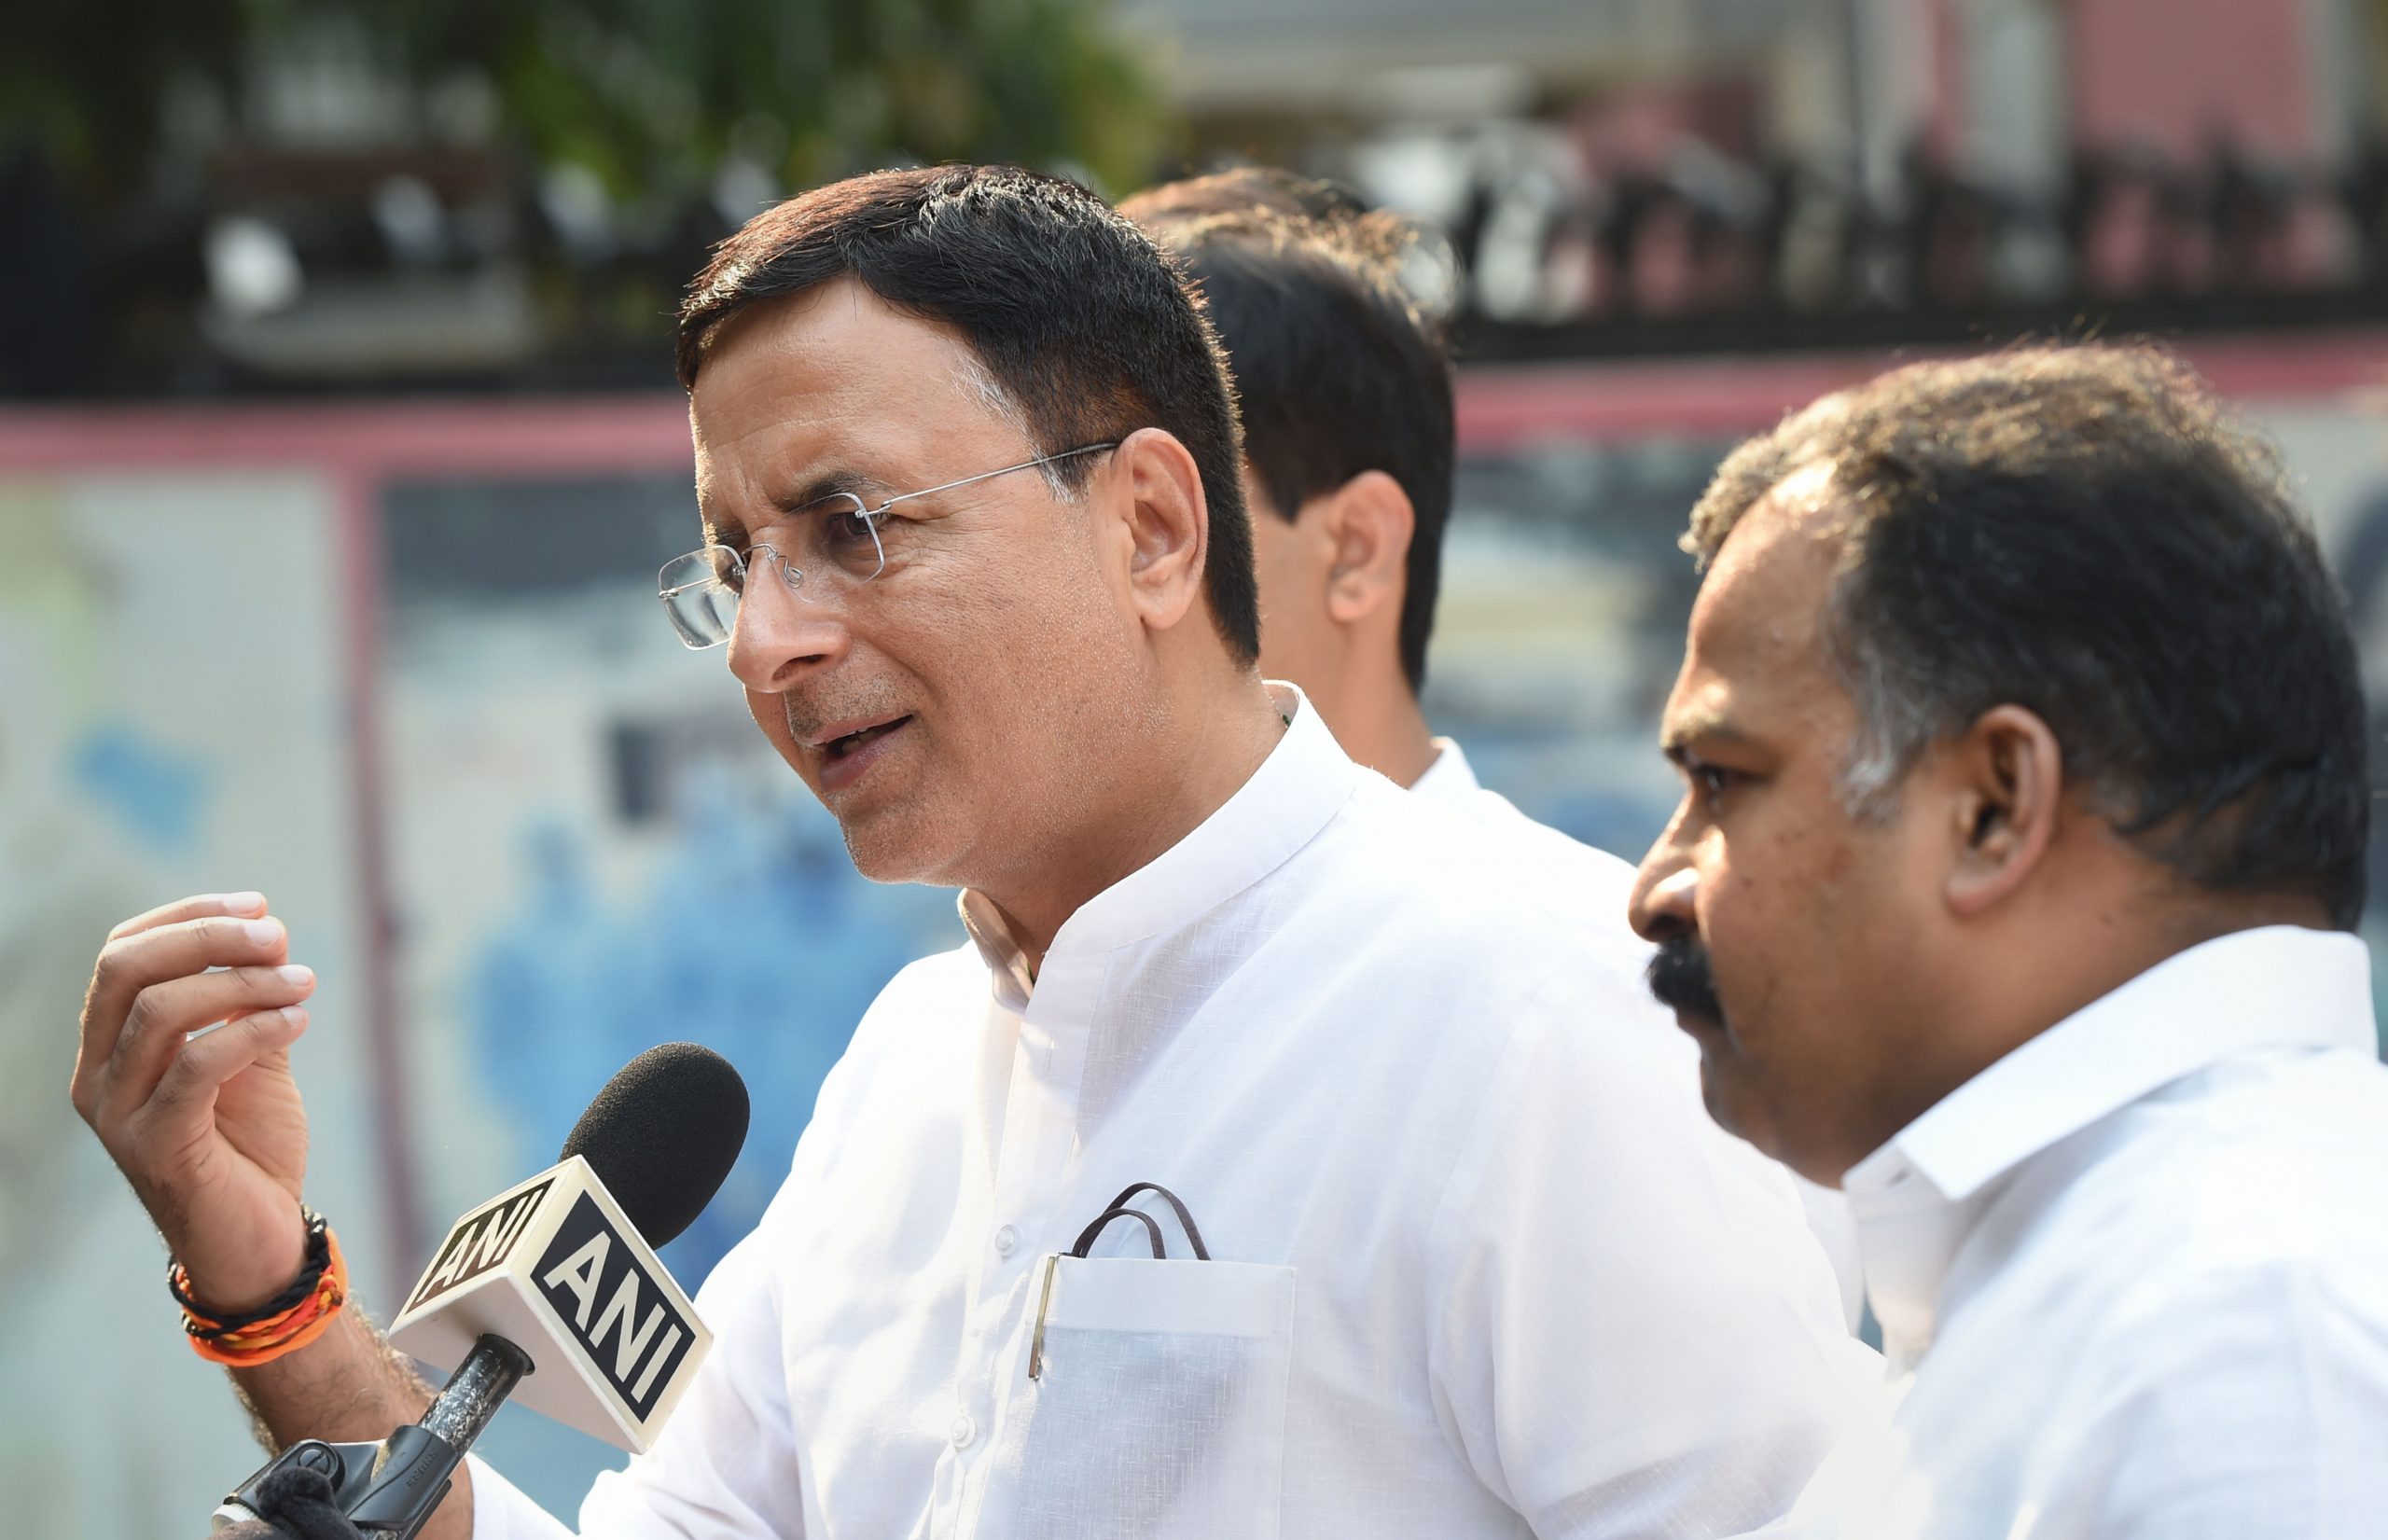 Congress leader Randeep Surjewala lists 5 observations to government on COVID-19